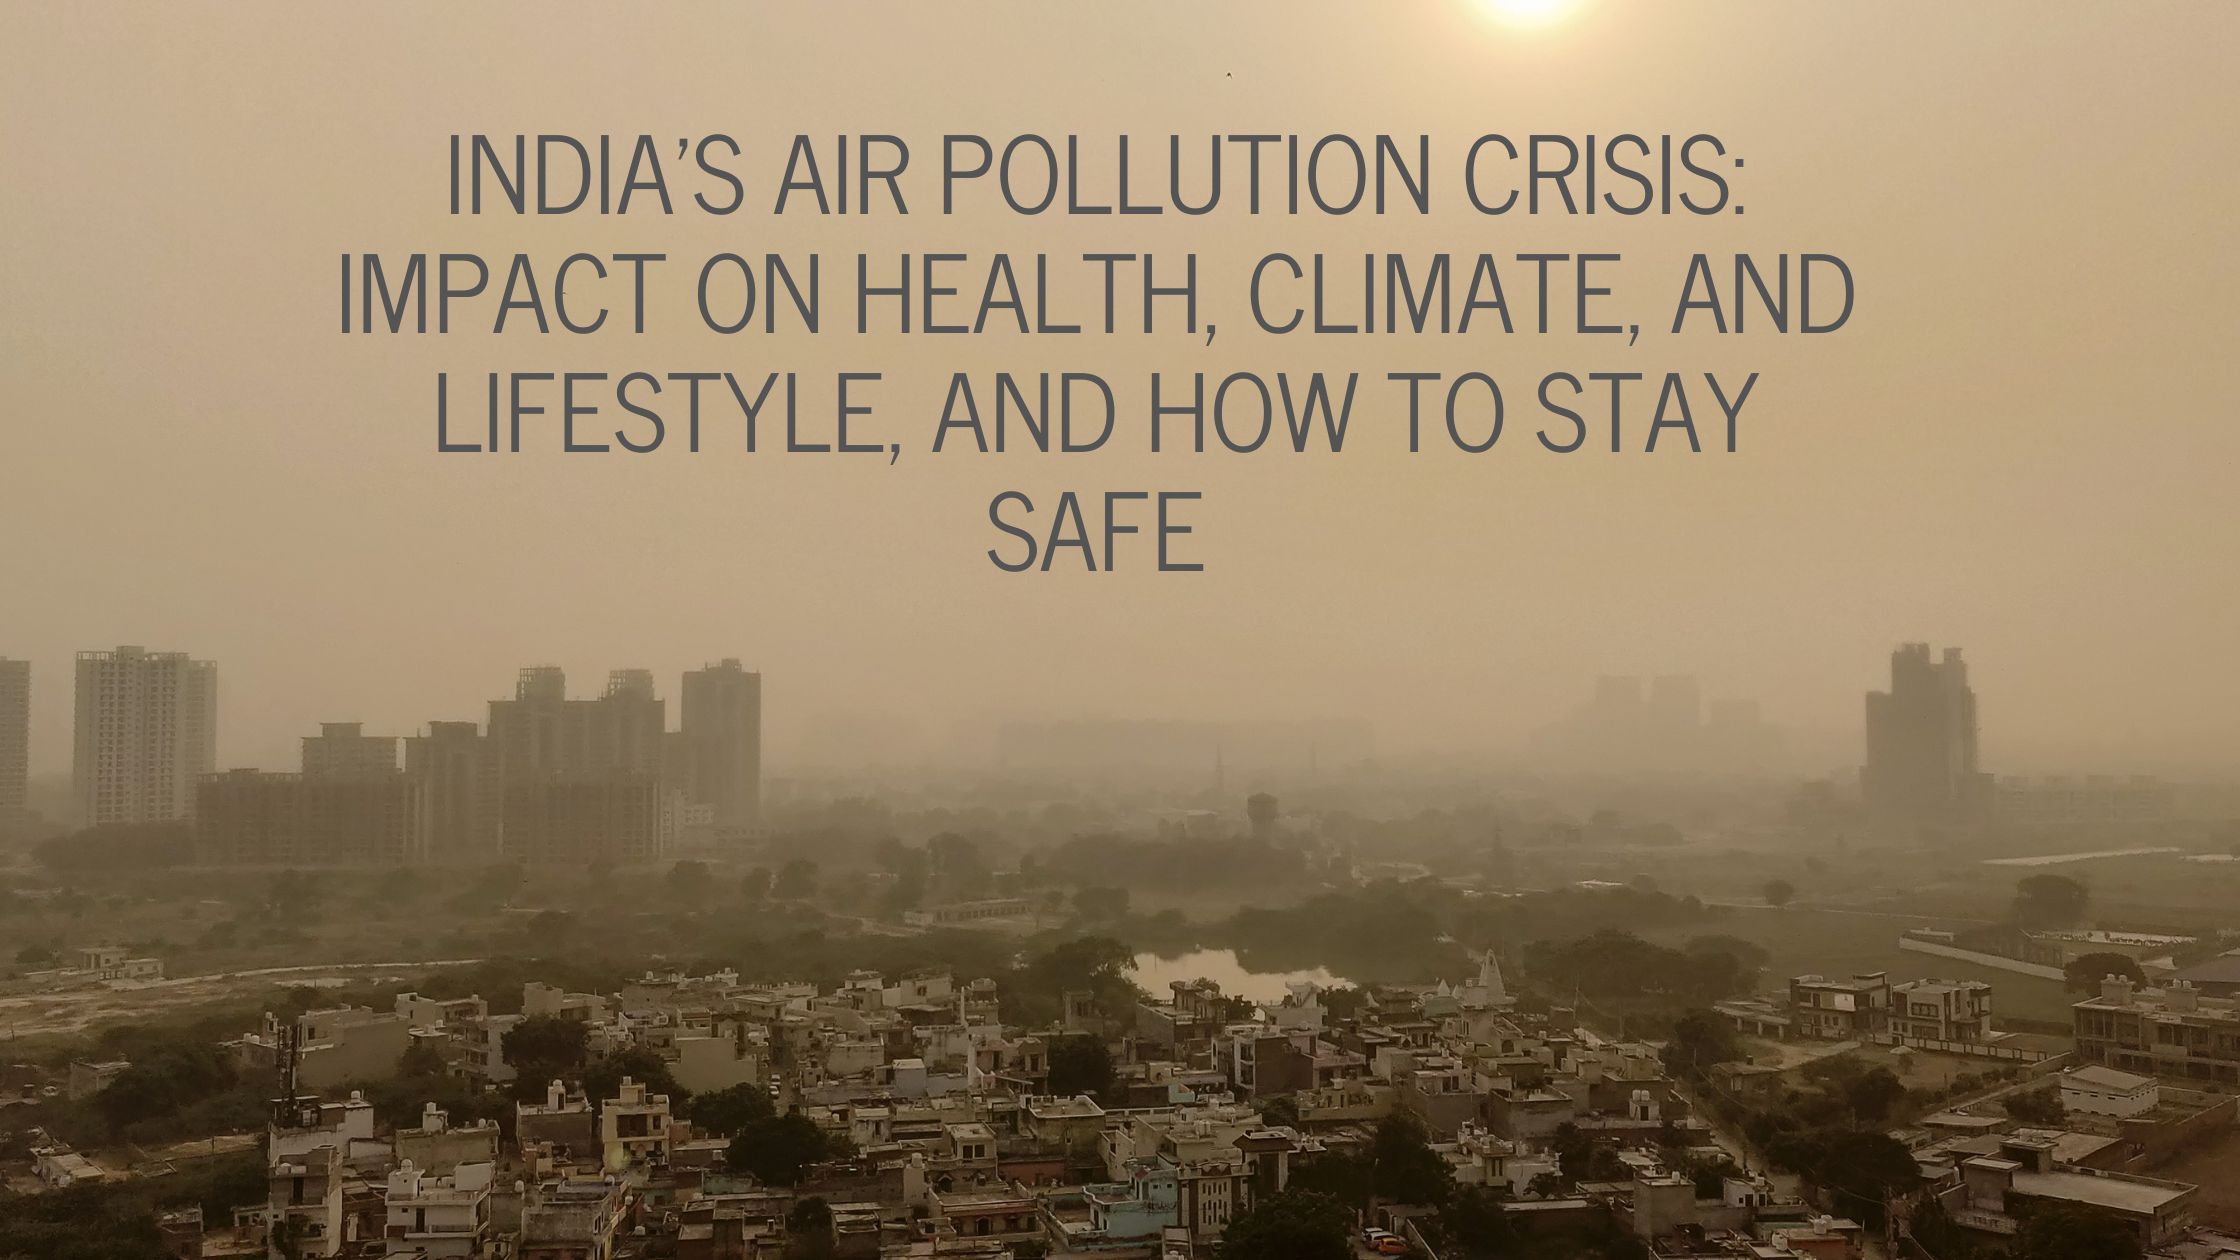 India’s Air Pollution Crisis: Impact on Health, Climate, and Lifestyle, and How to Stay Safe